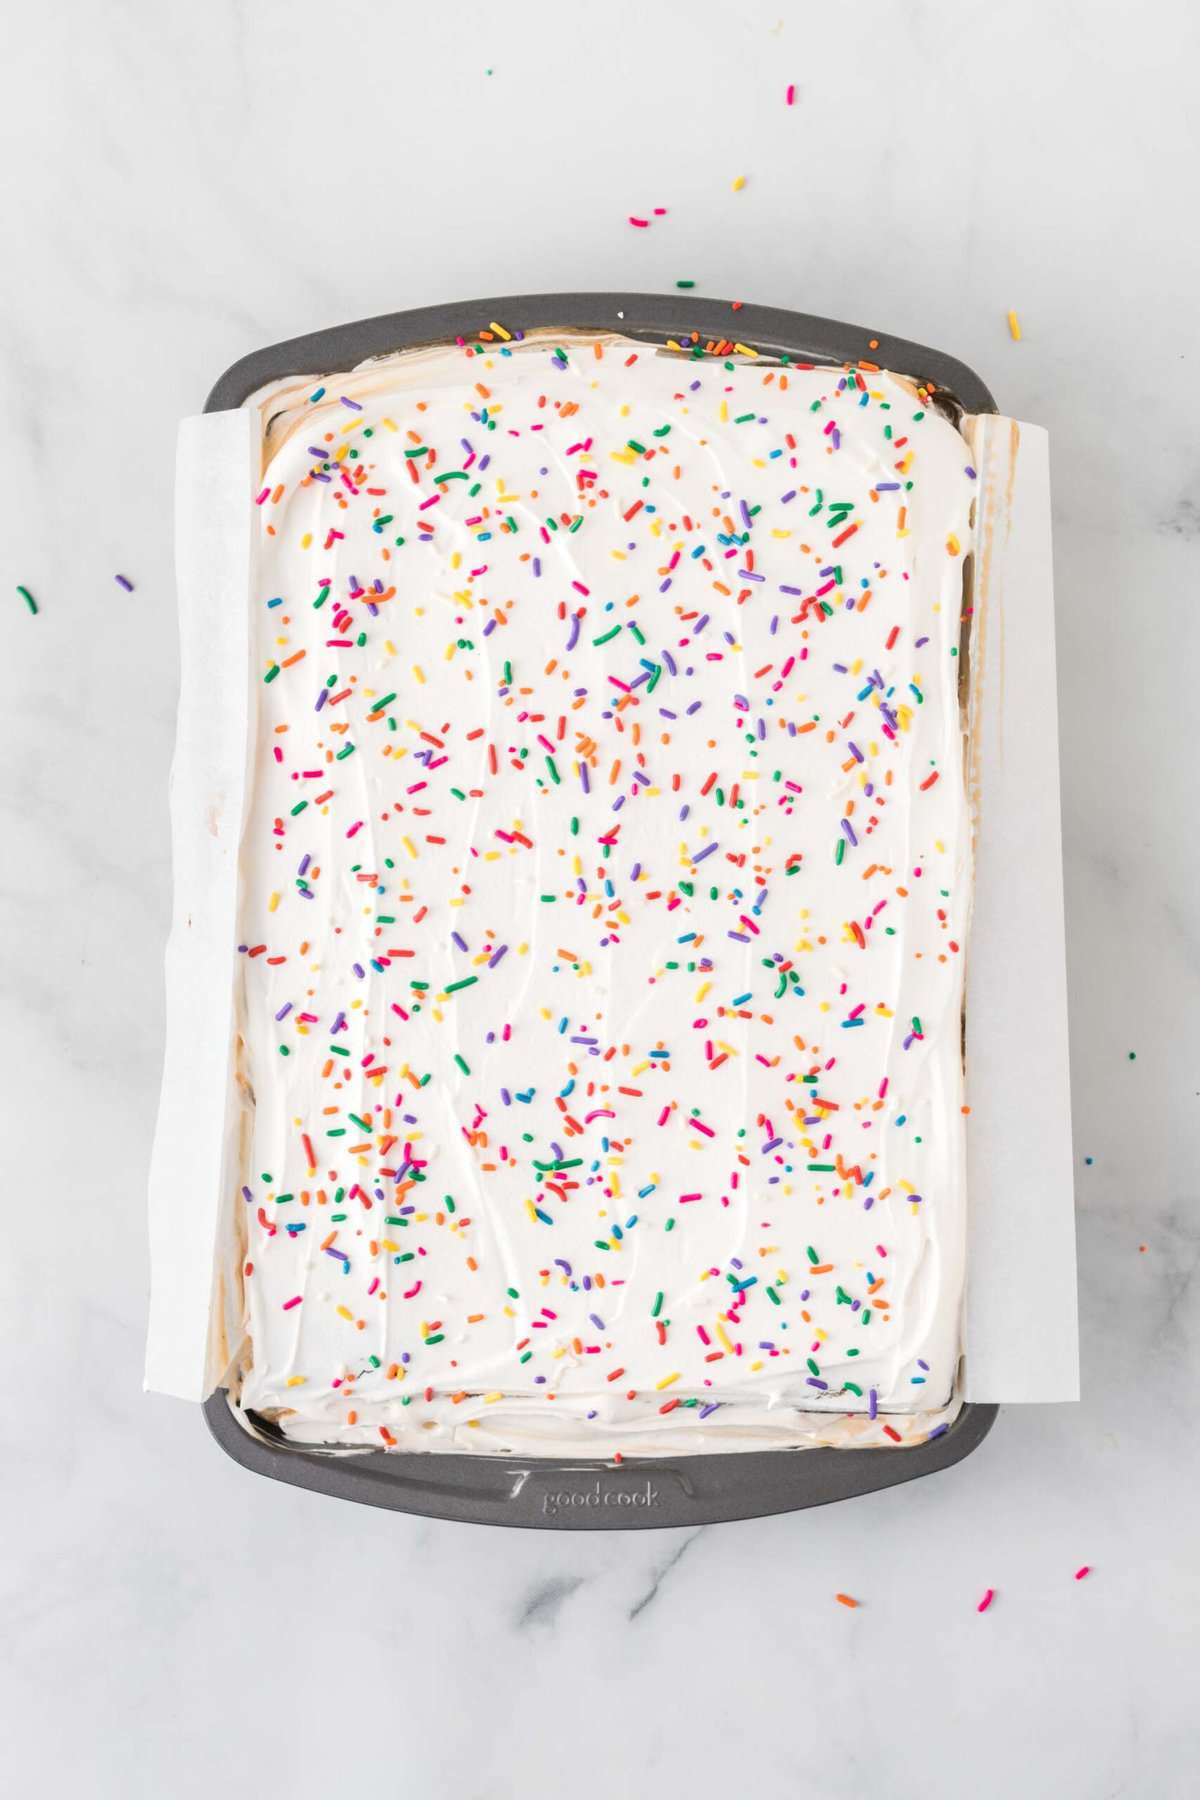 Overhead view of finished ice cream sandwich cake in pan